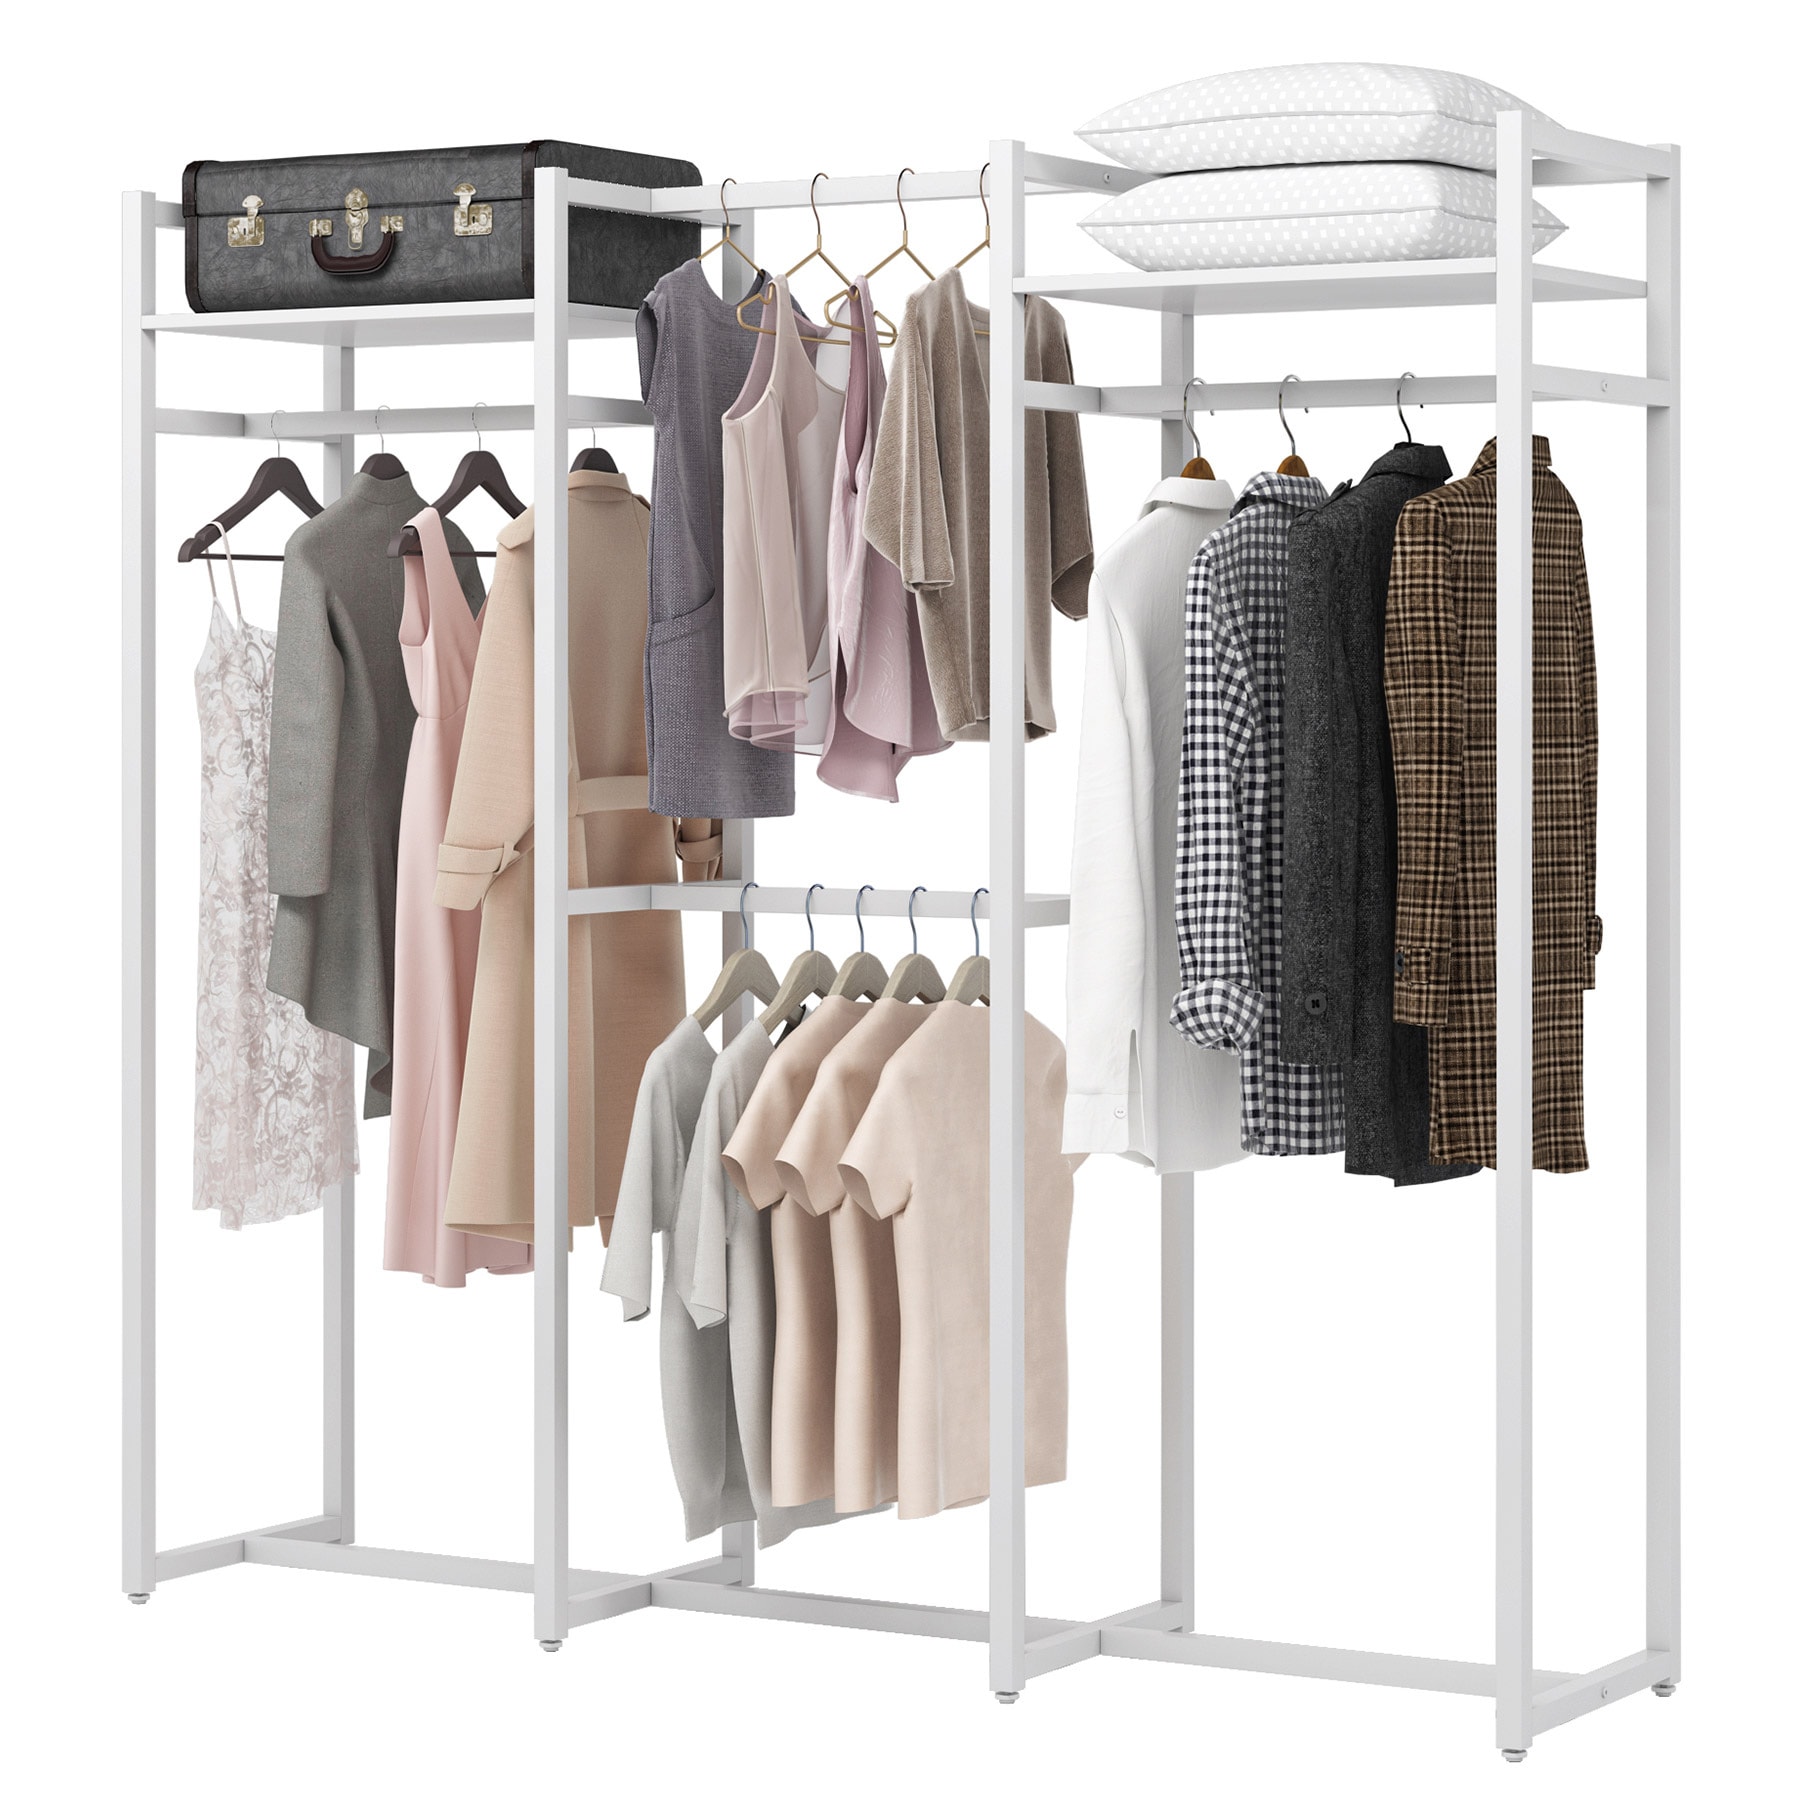 Honey-Can-Do 55 in. H x 18 in. W Collapsible Wall-Mounted Clothes